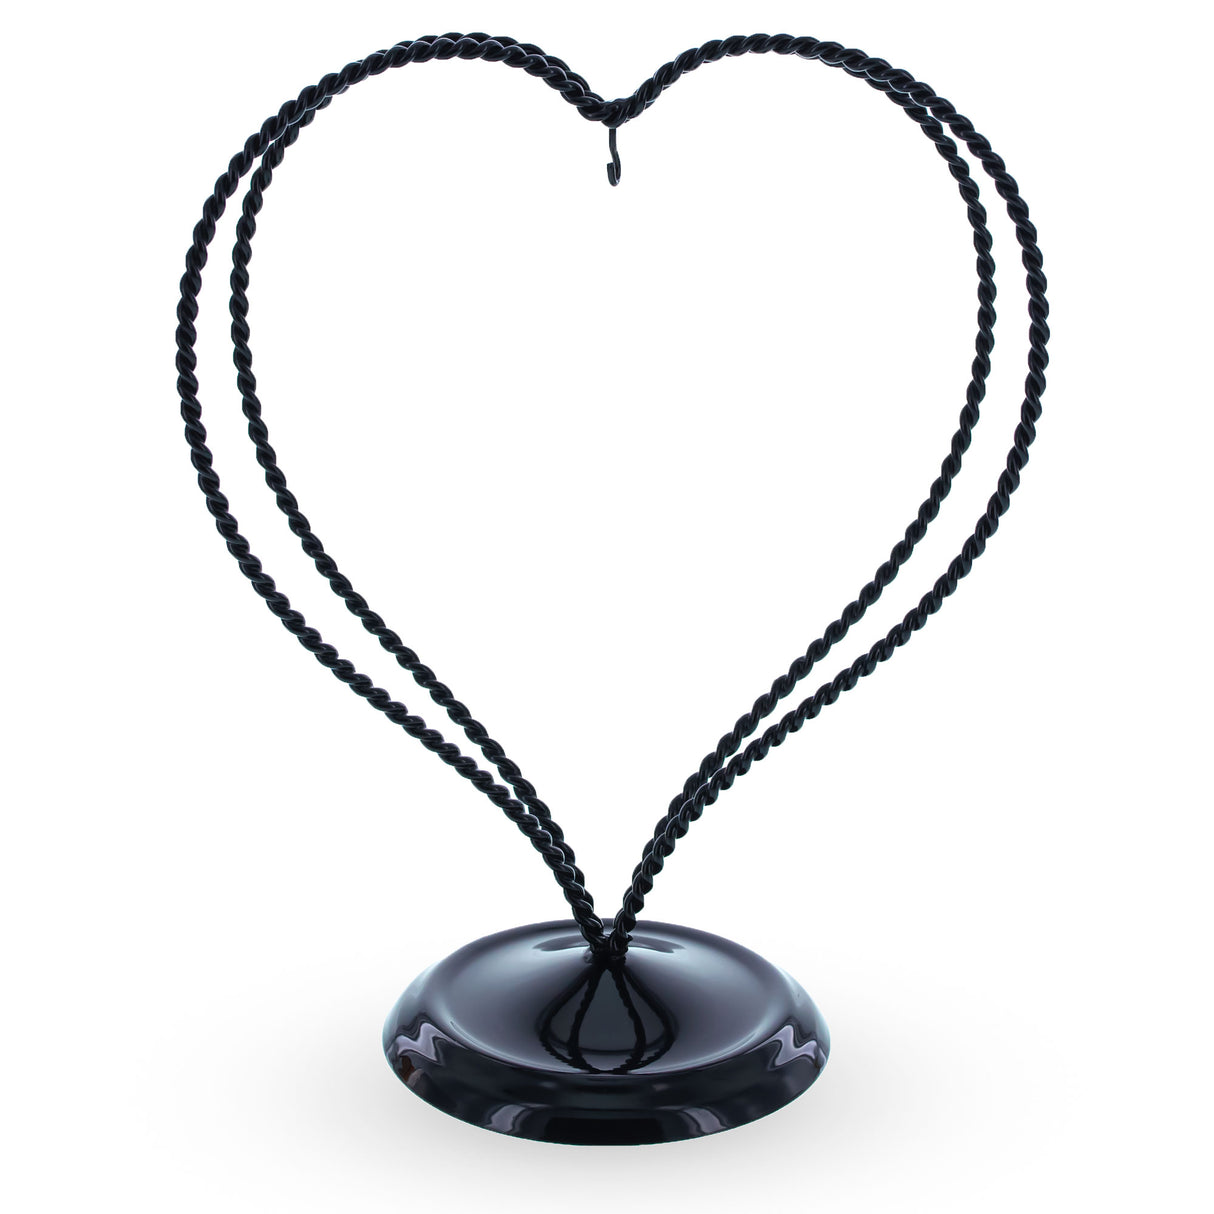 Double Swirled Heart Black Metal Solid Round Base Ornament Display Stand 7.25 Inches in Black color,  shape